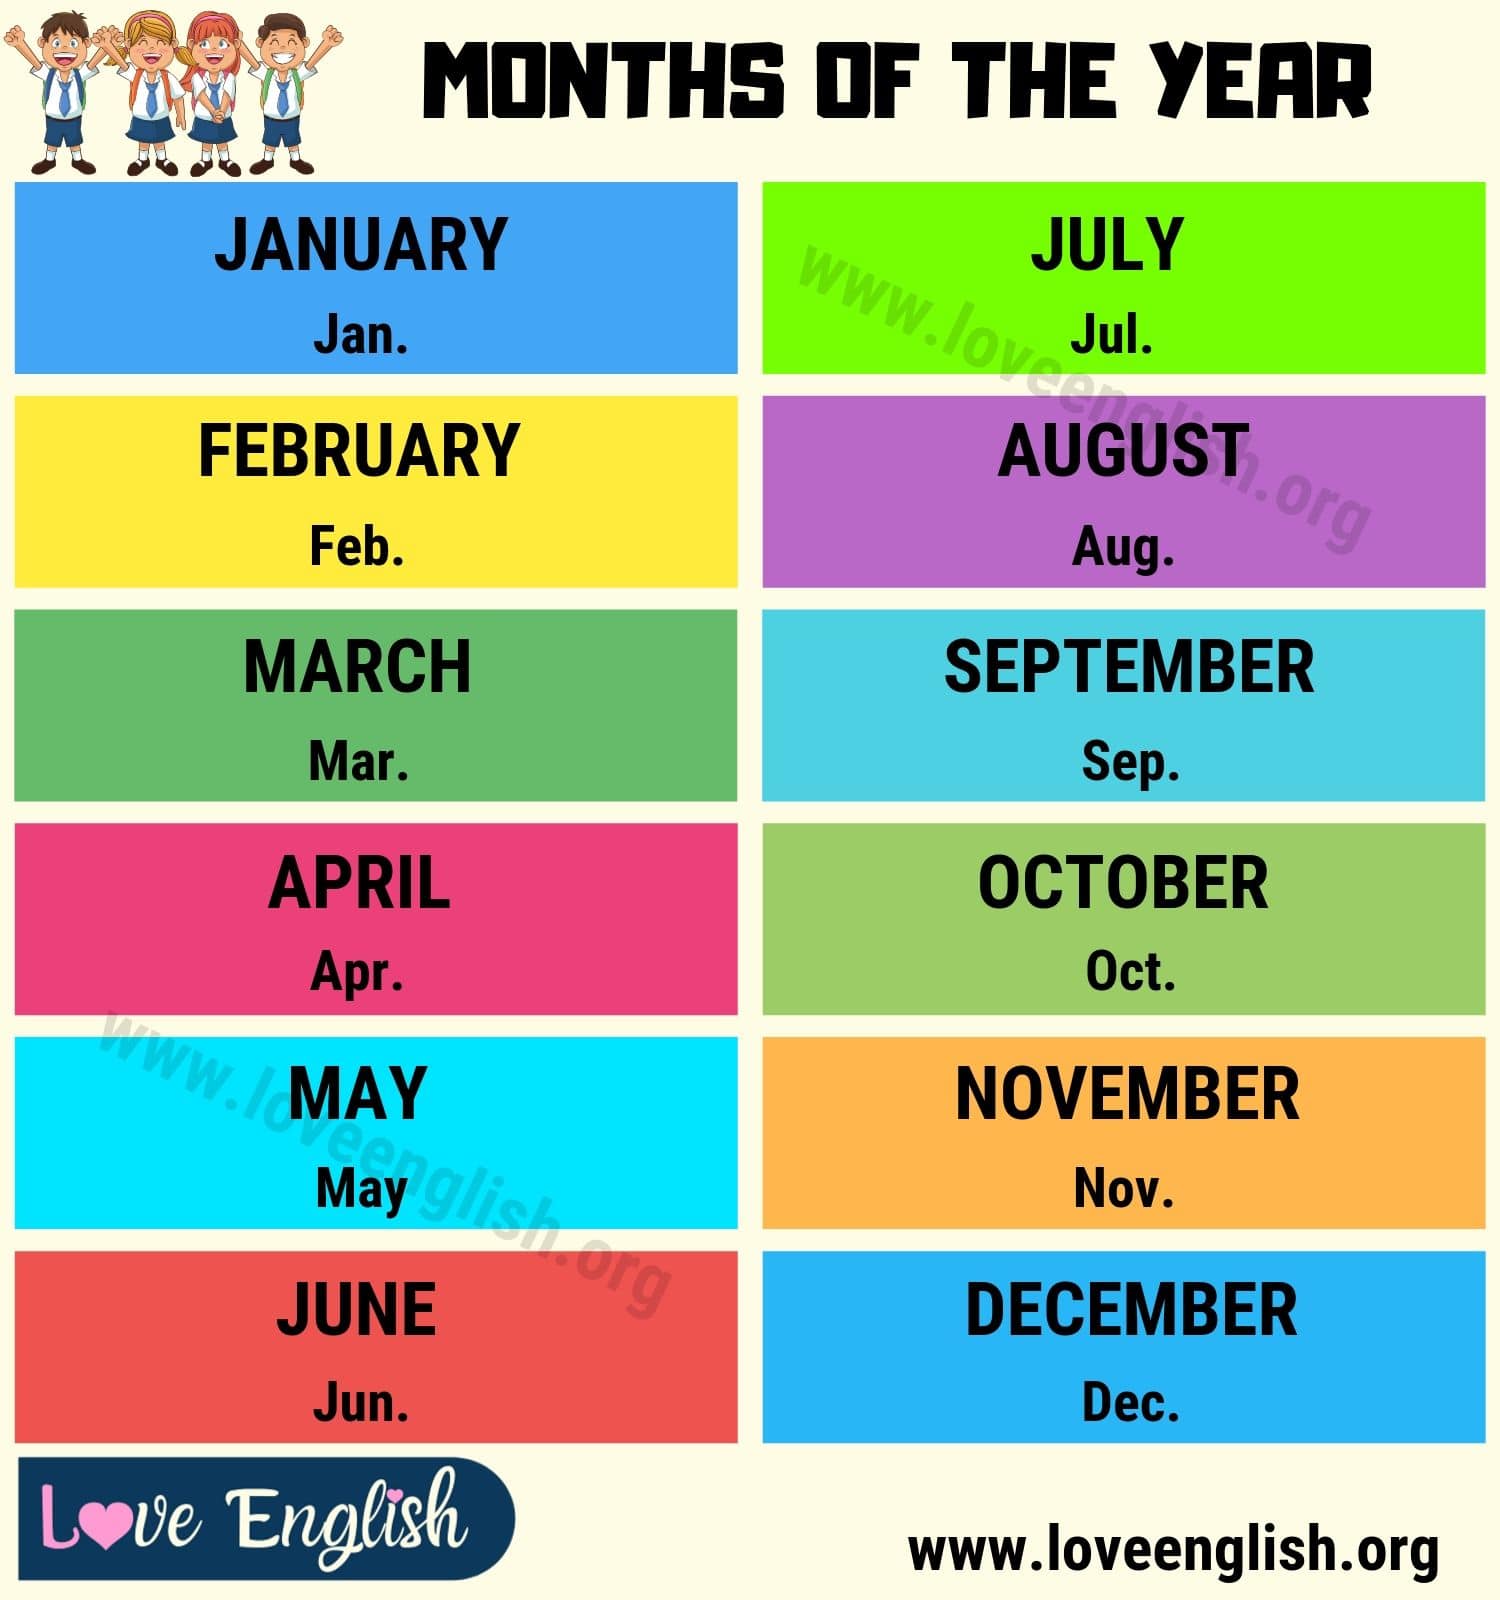 12 months of the year